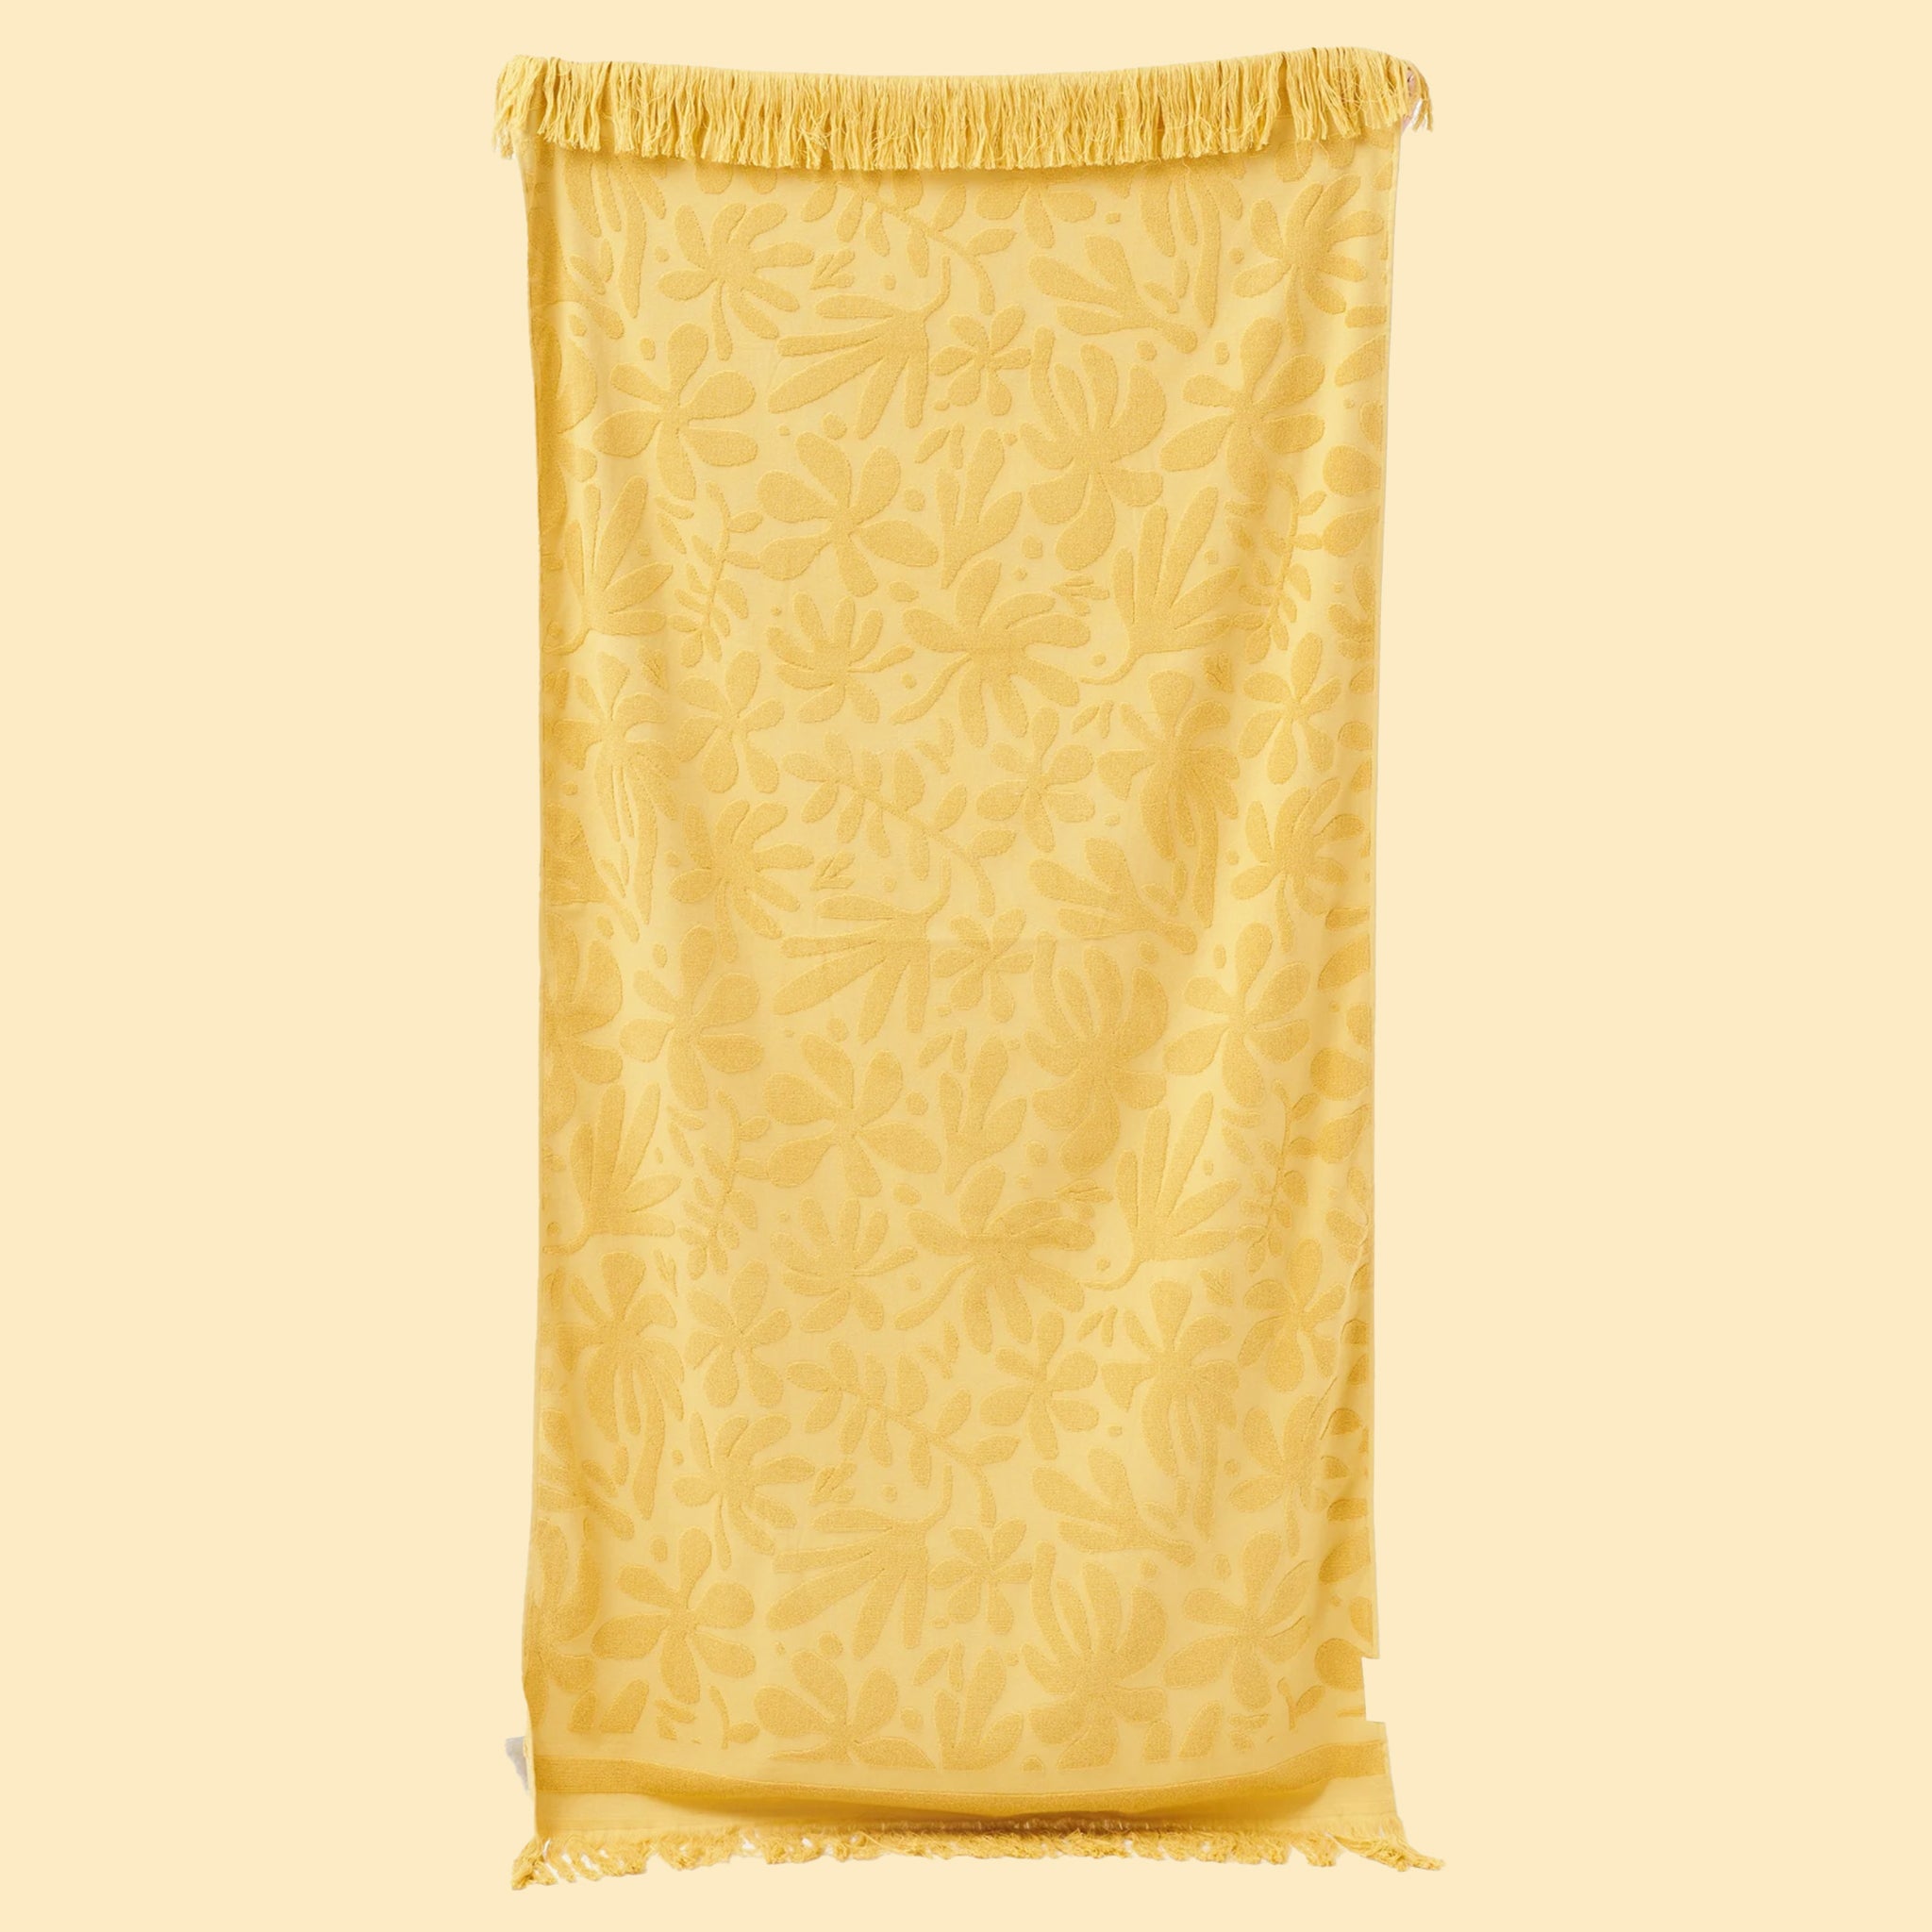 A yellow beach towel with a subtle yellow floral print and fringe edges.